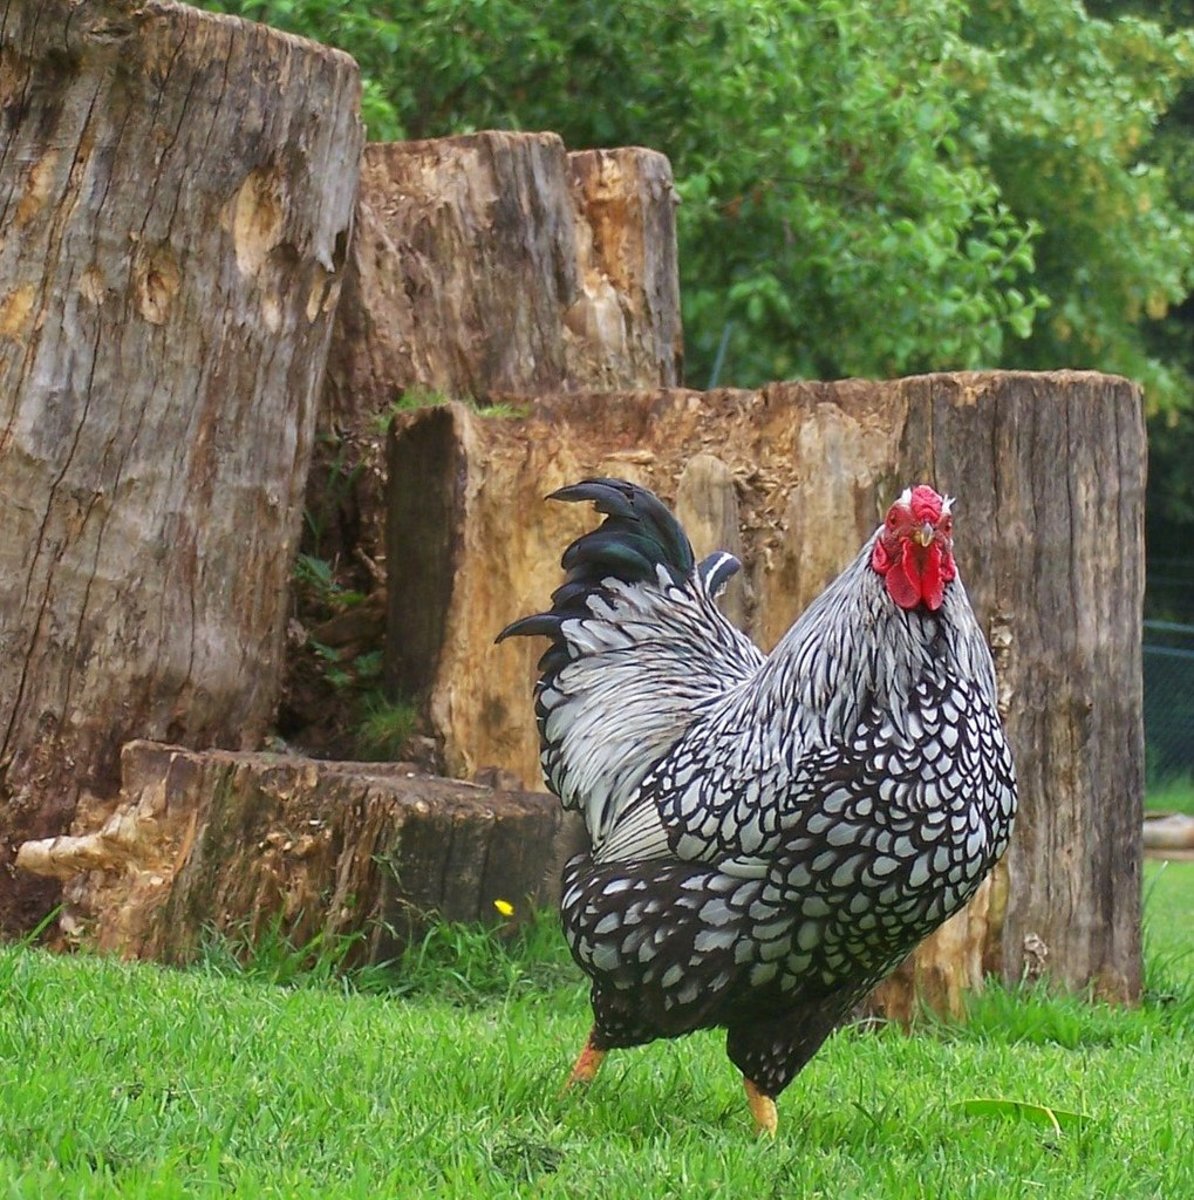 A Silver Laced Wyandotte rooster.